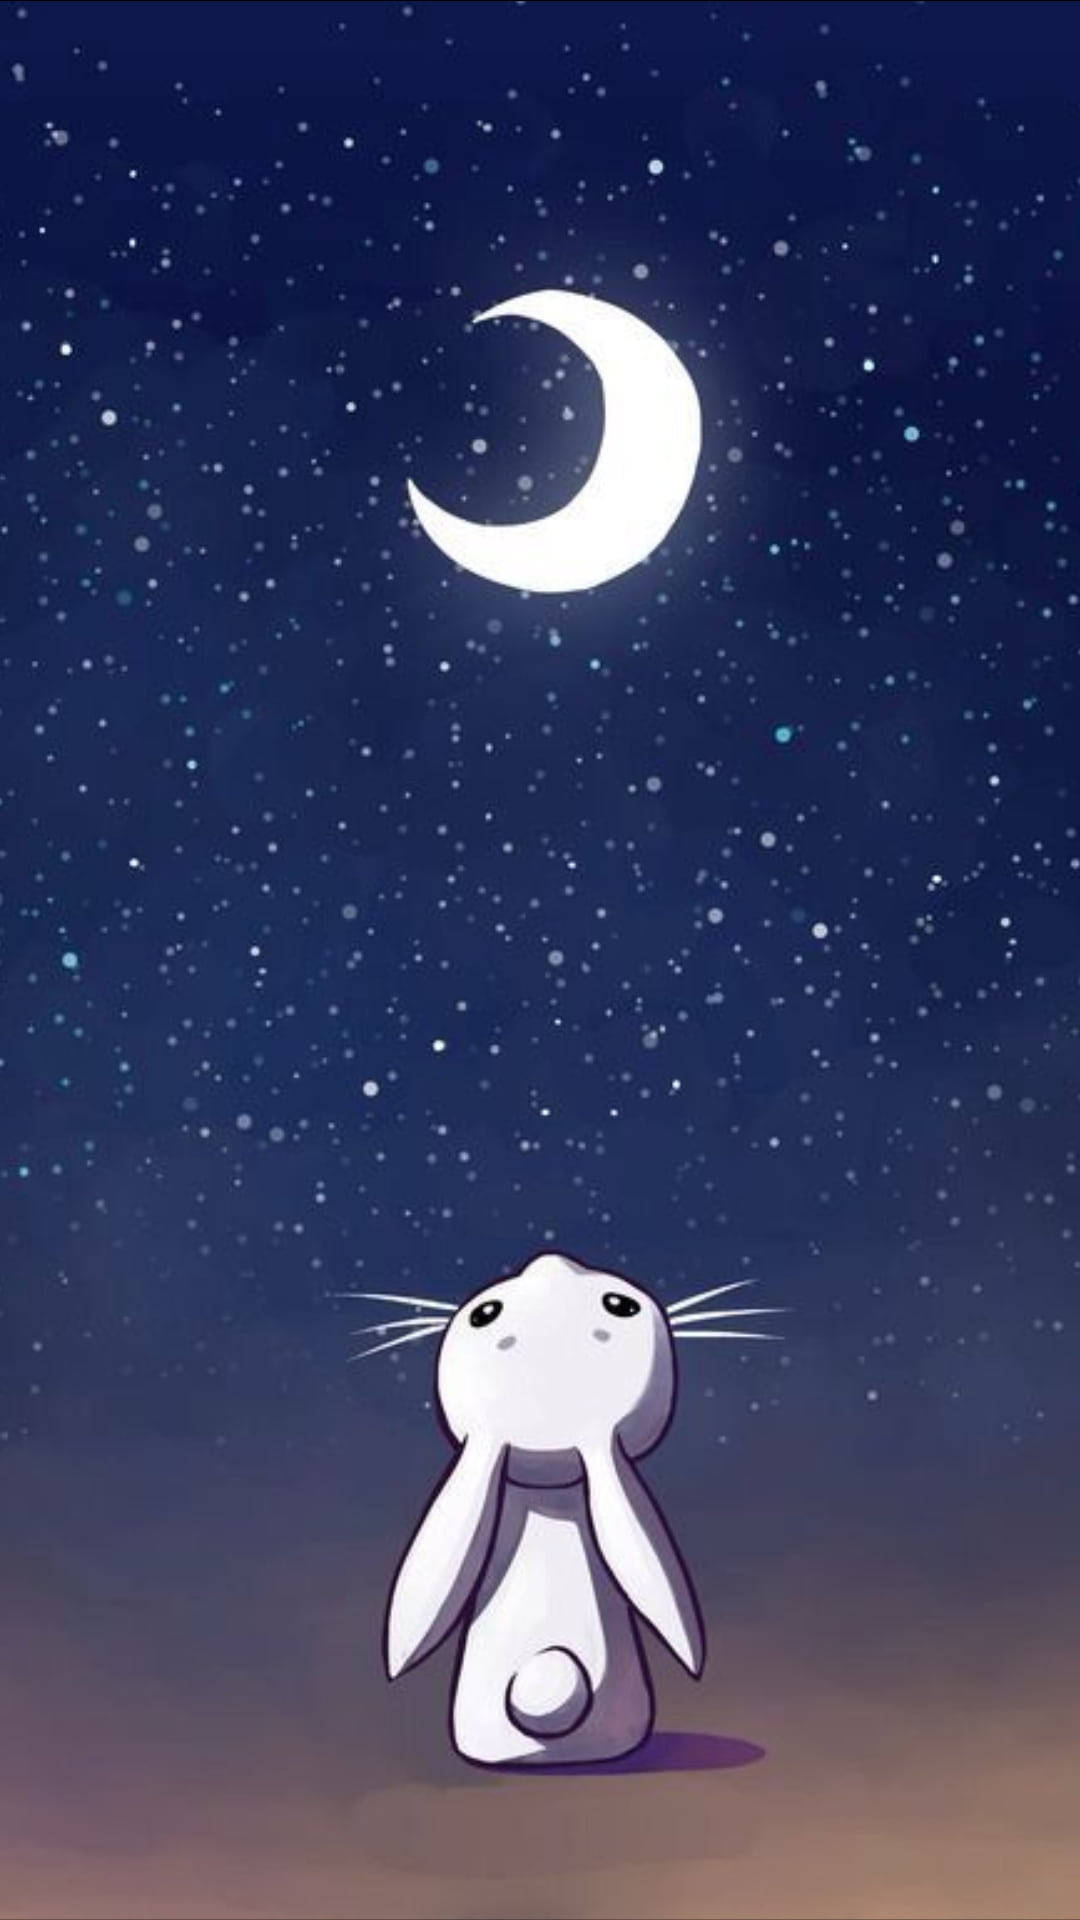 Cute Bunny Looking Up The Sky Background